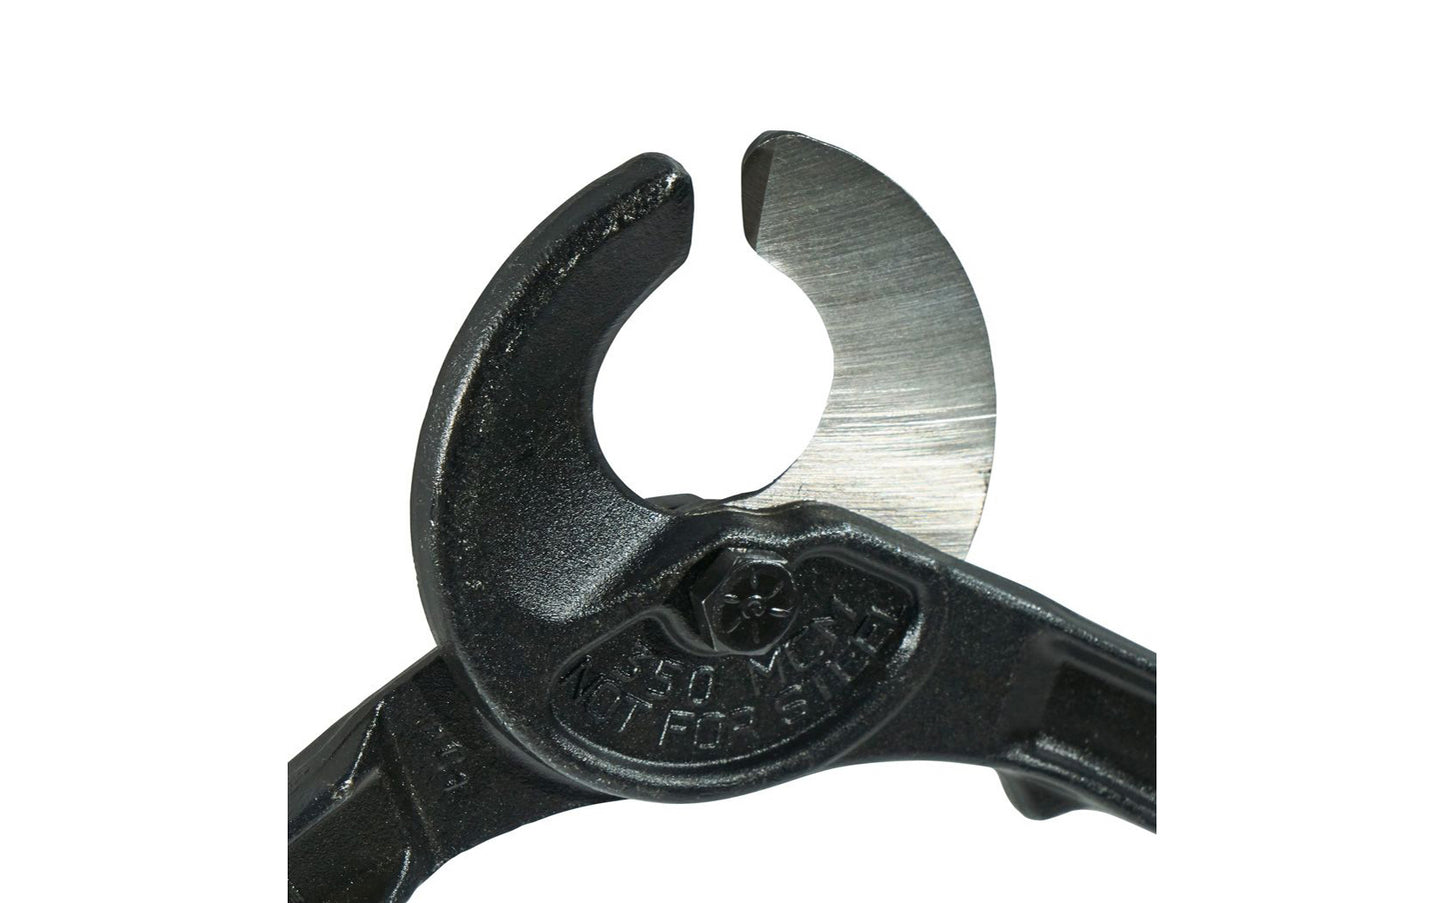 This Klein Tools Utility Cable Cutter features shear-cutting blades that cut 350 MCM Copper and 350 MCM Aluminum cable. Made from forged steel with black-oxide finish for long life. Shear-type hook jaws grab and hold cable. Non-slip vinyl grips on 16-Inch handles keep this tool safely in your hands. Does not cut steel or ACSR.  Made in USA